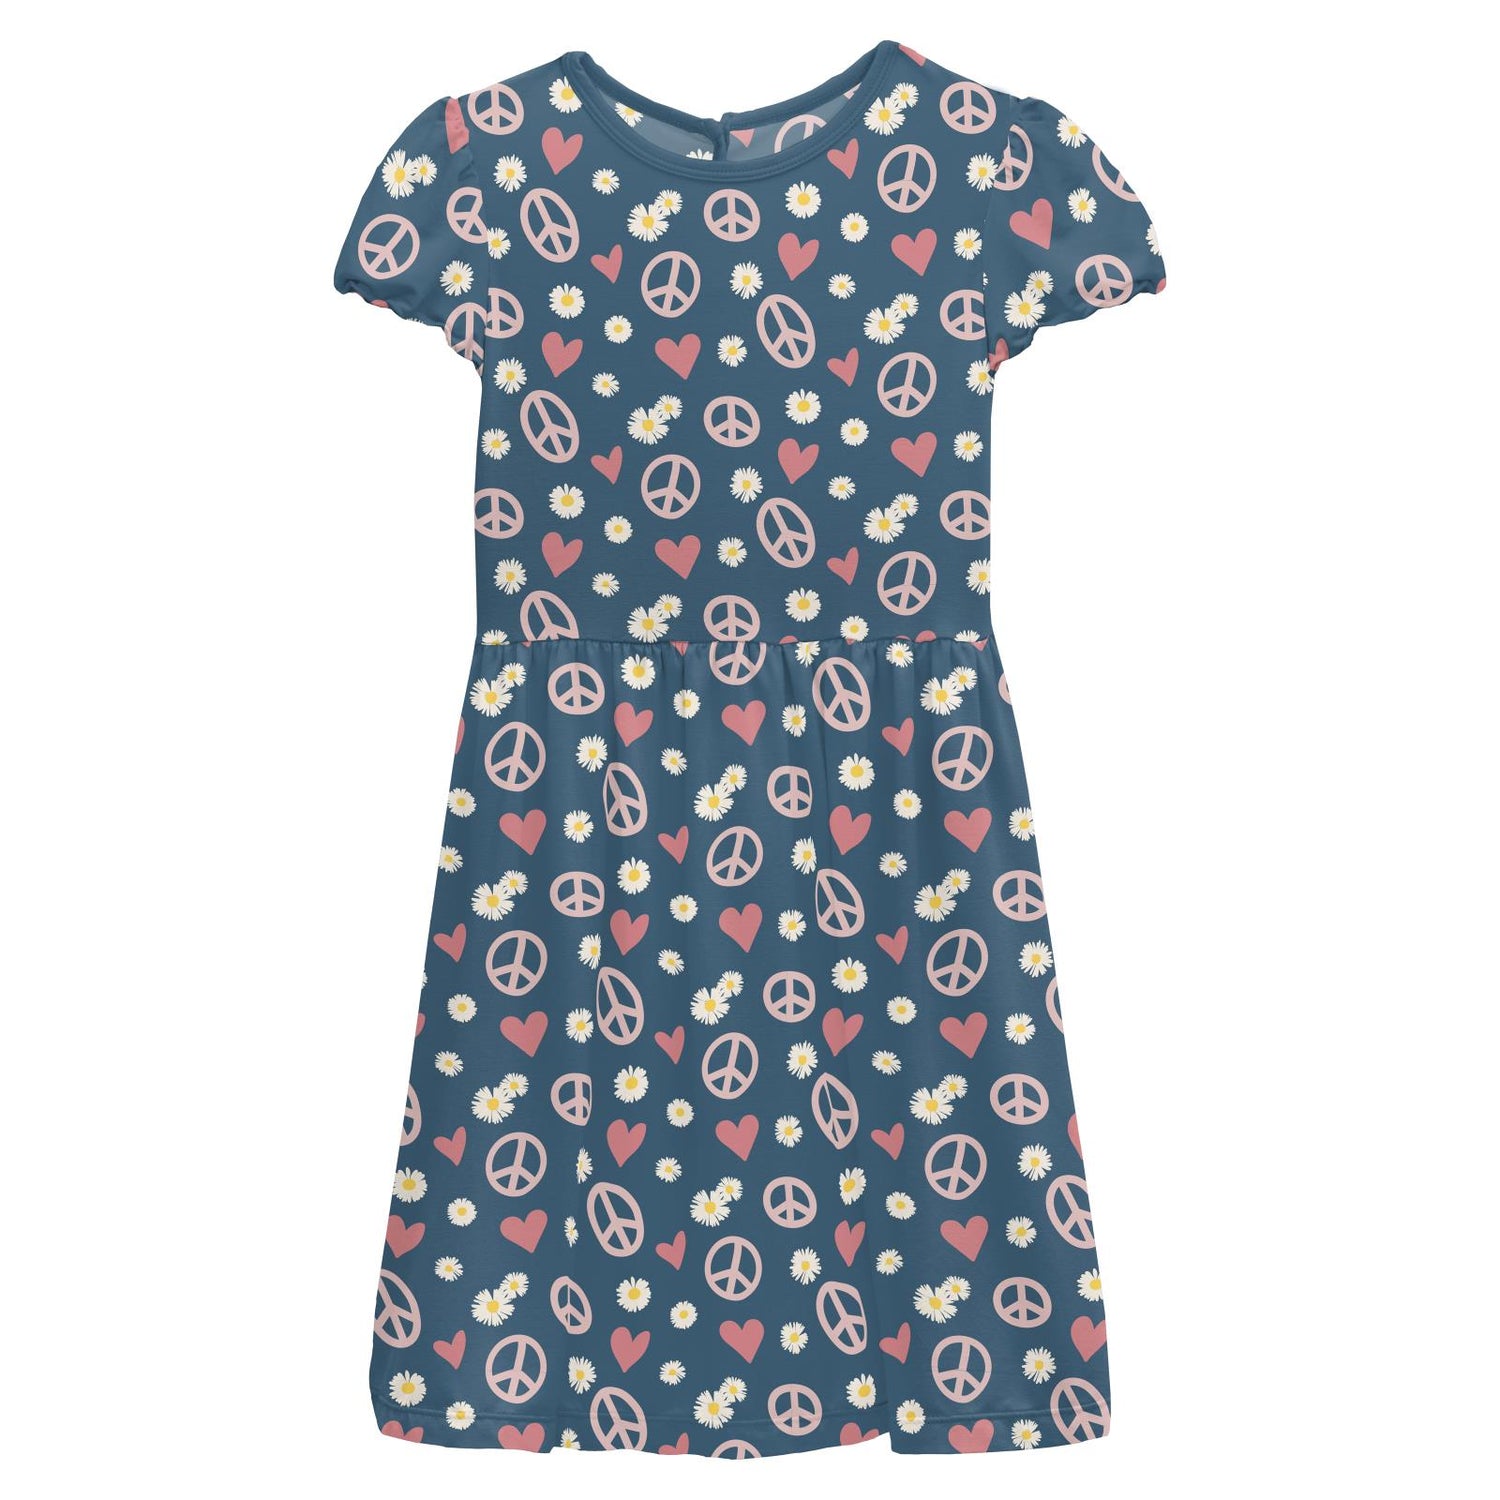 Print Flutter Sleeve Twirl Dress with Pockets in Peace, Love and Happiness